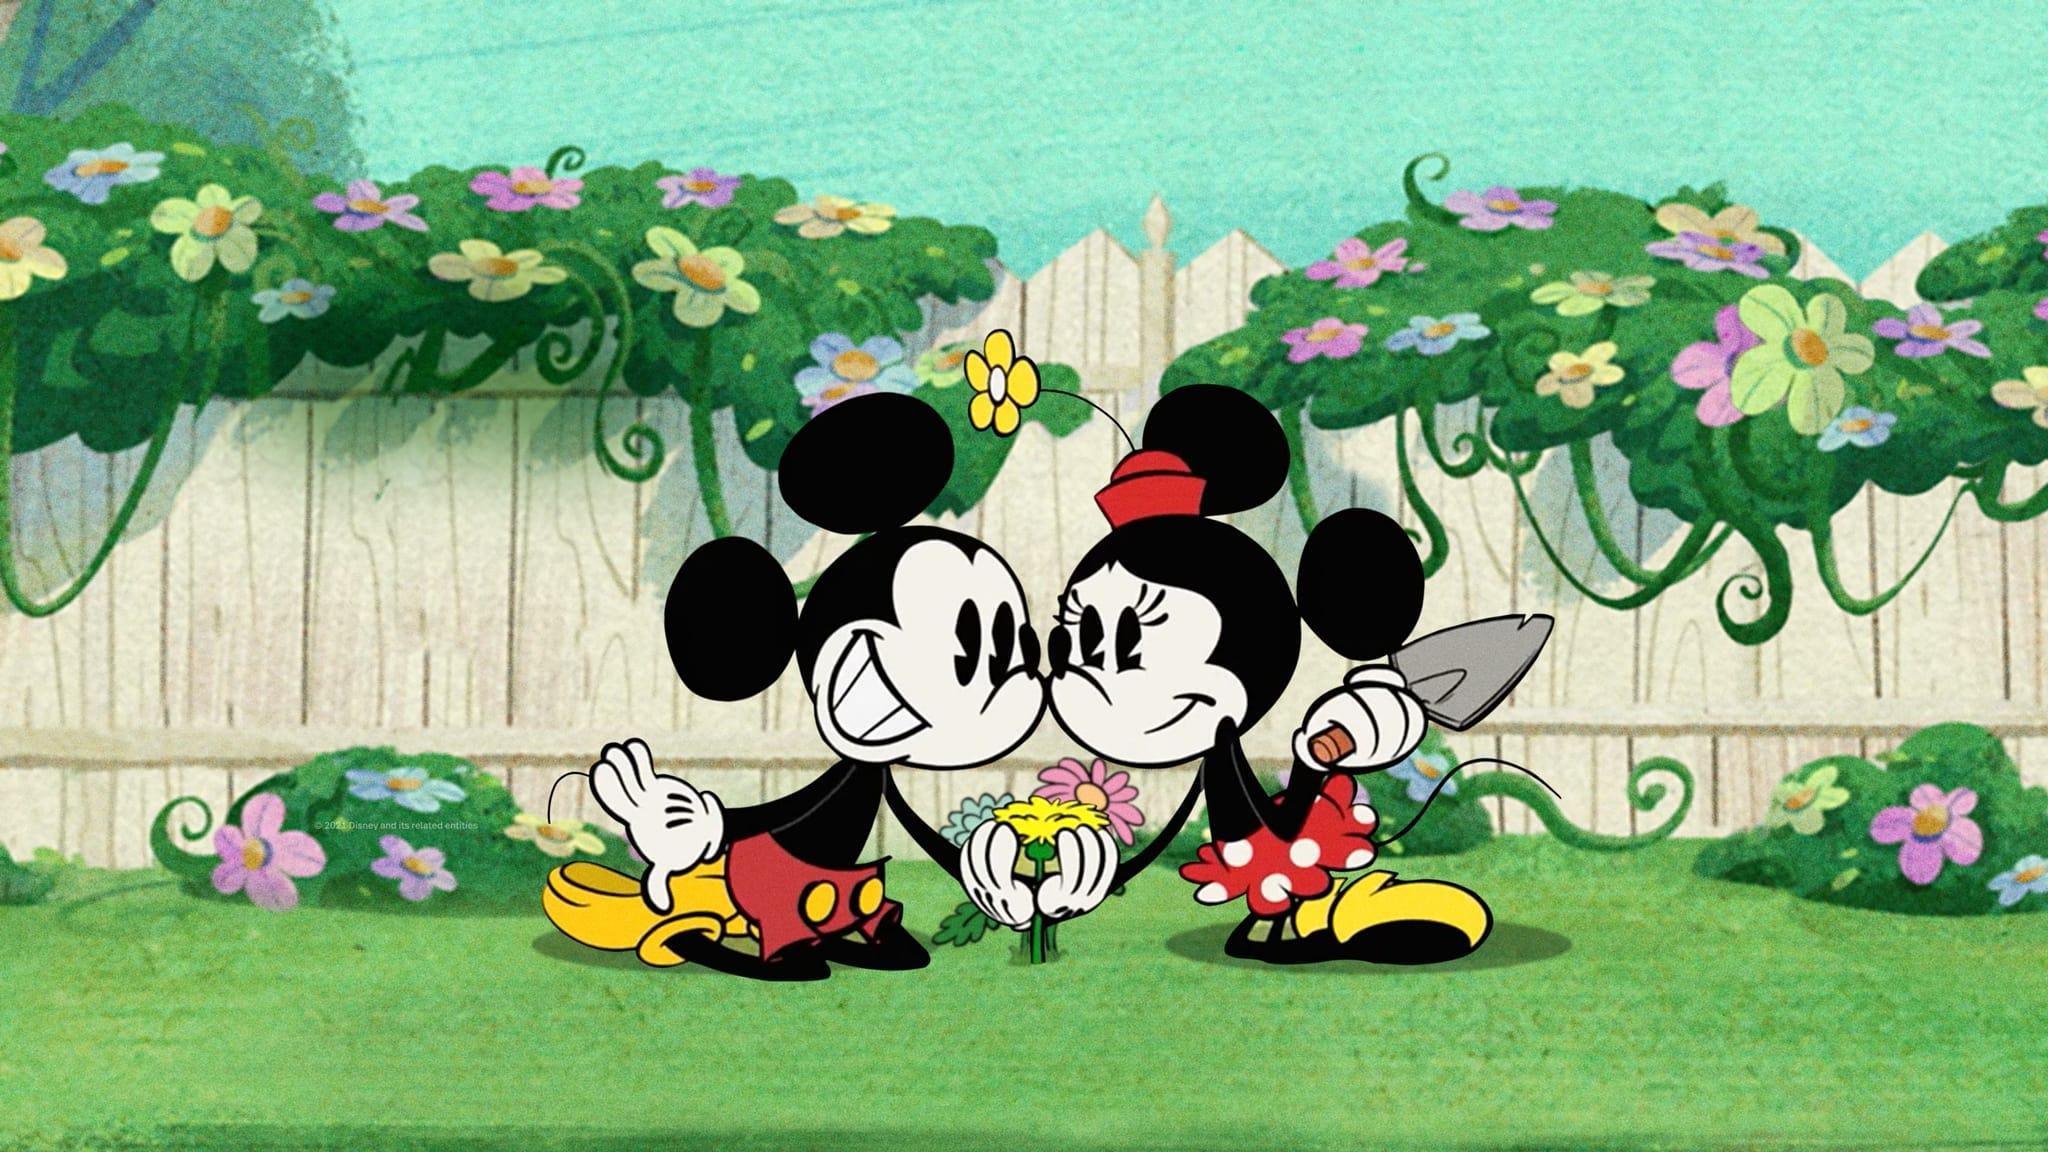 The Wonderful Spring of Mickey Mouse backdrop